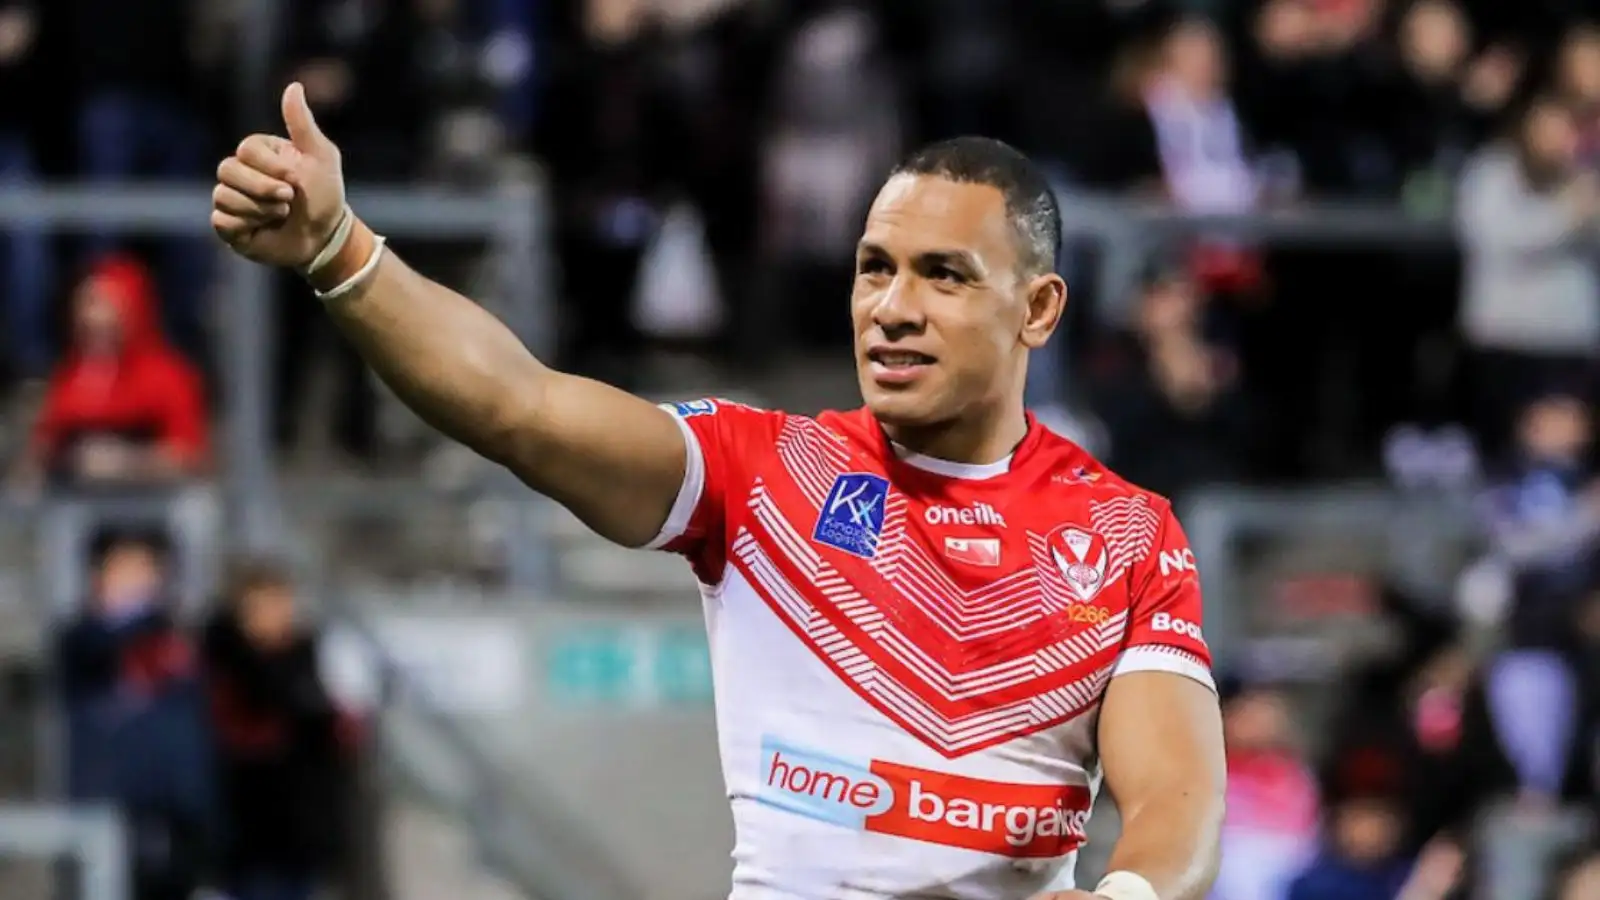 St Helens confirm 11 departures, including overseas star Will Hopoate